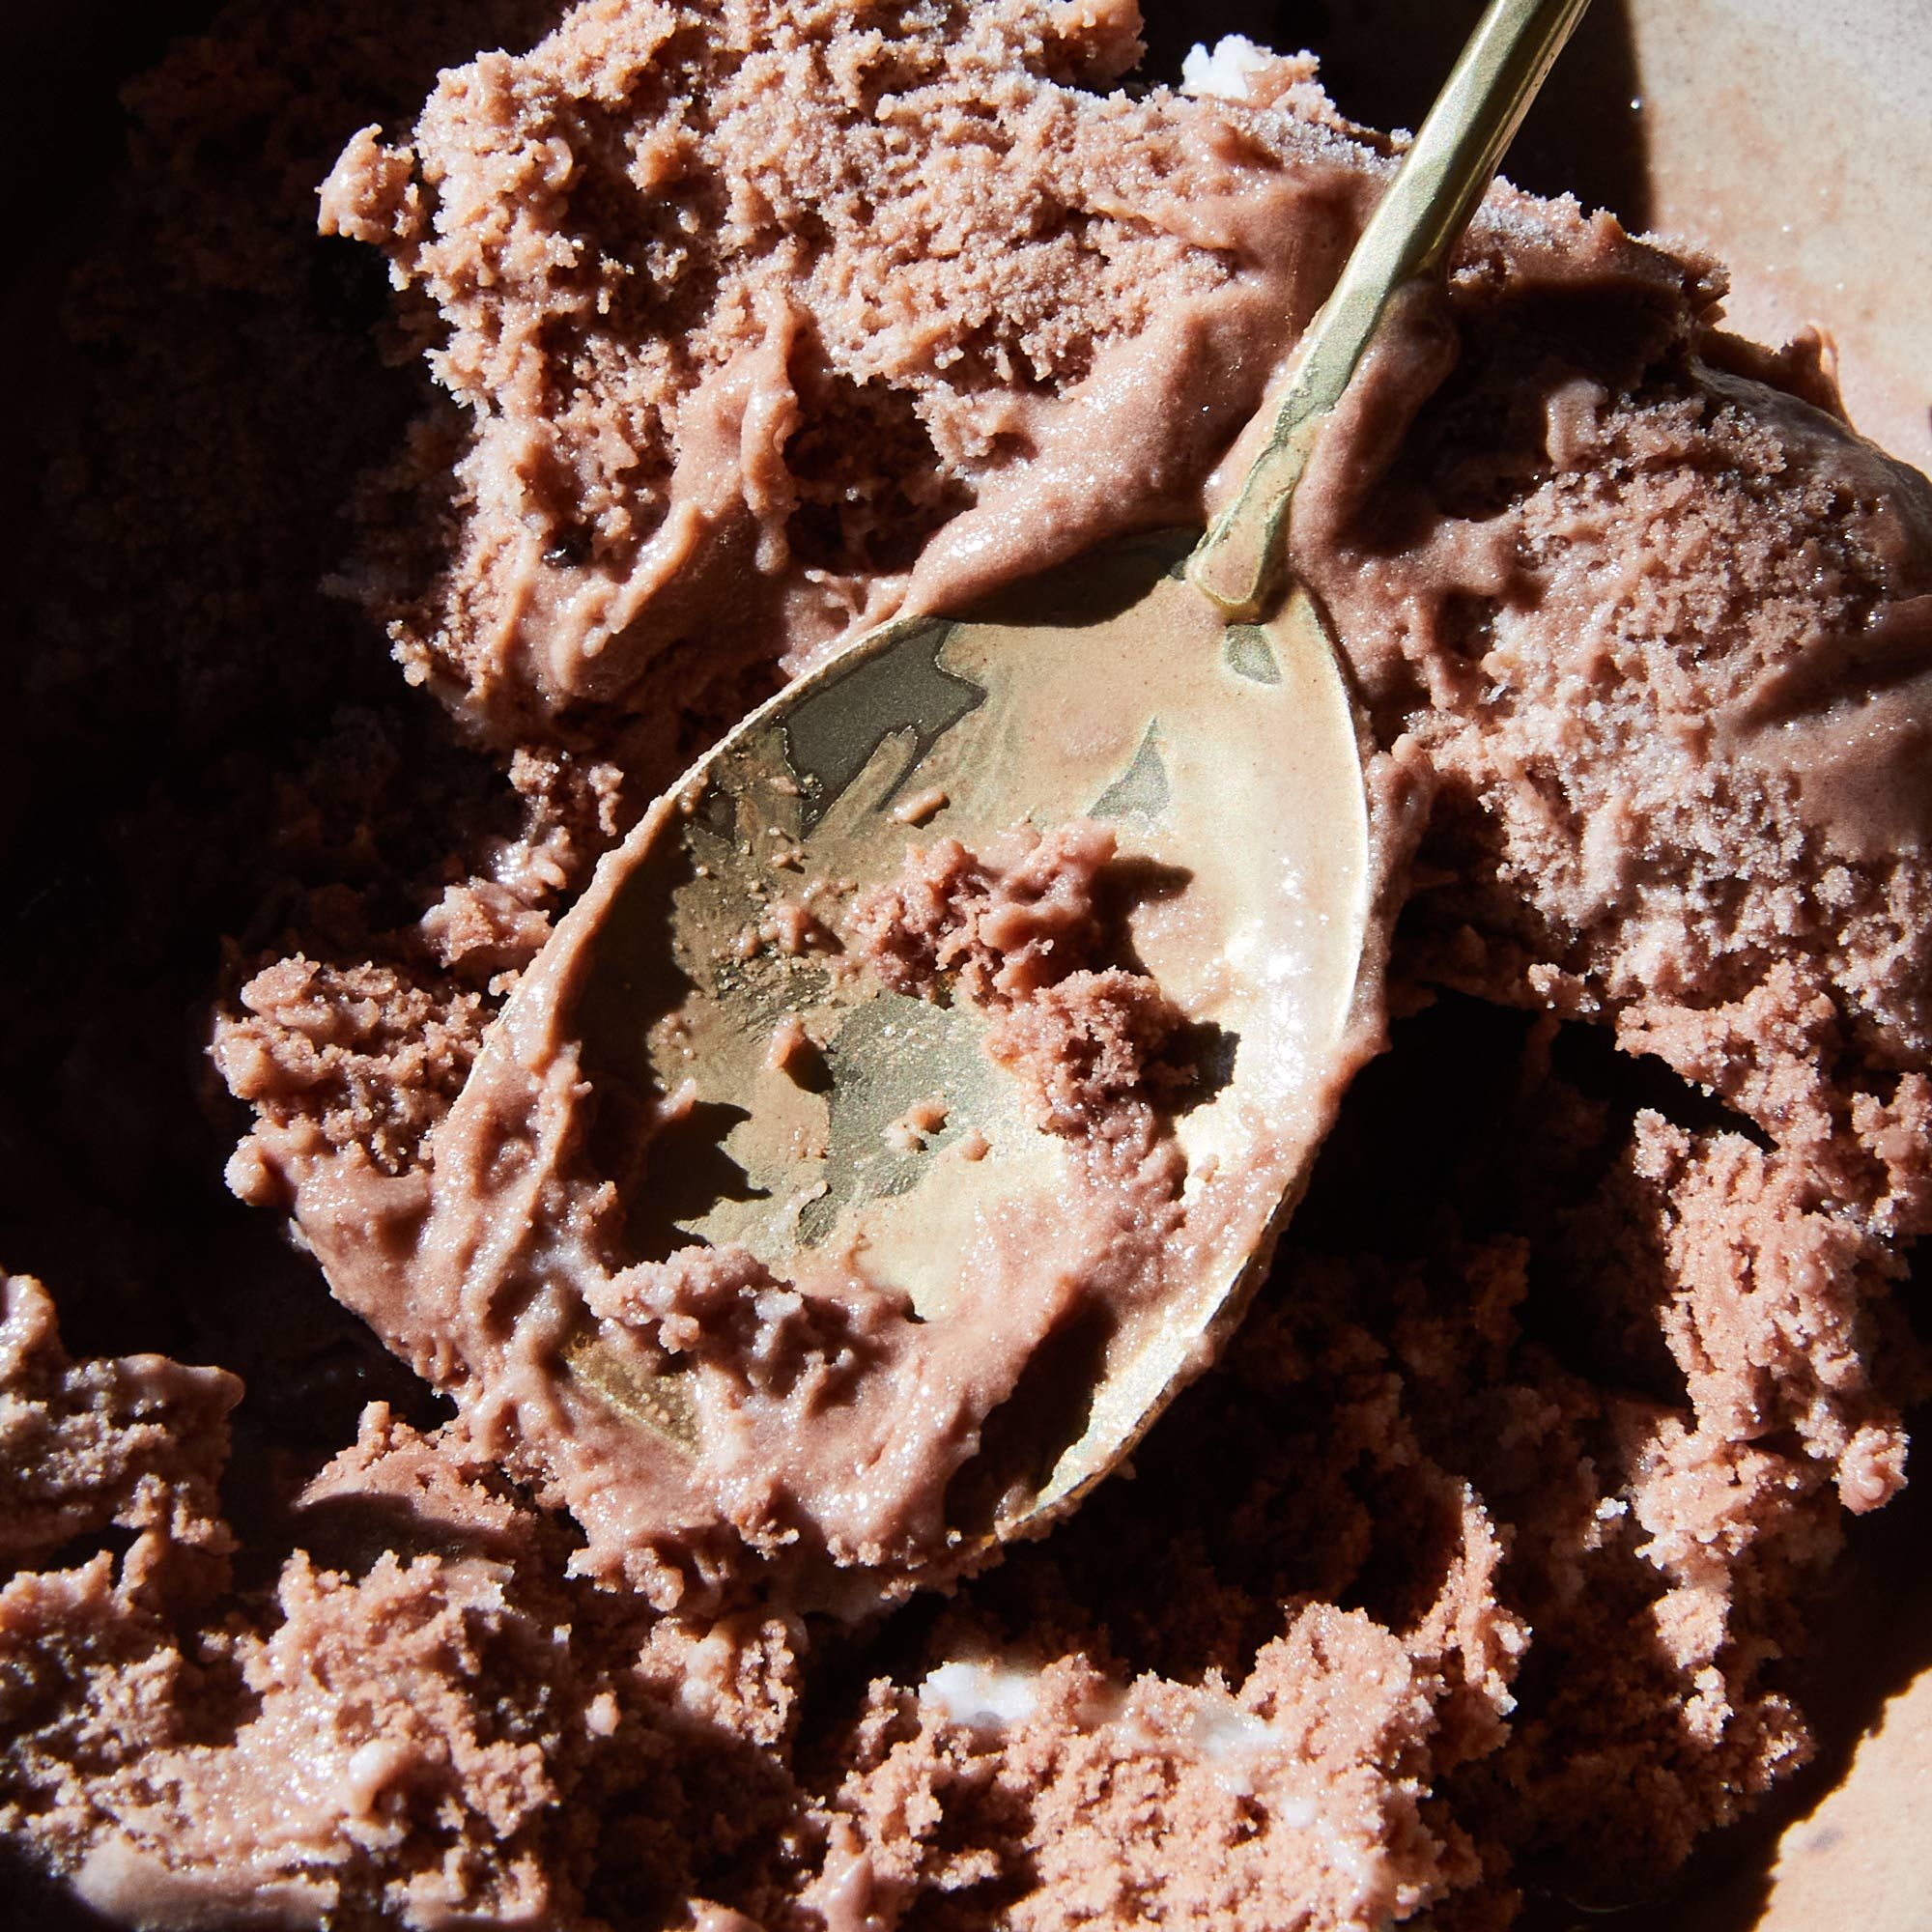 A scoop of chocolate ice cream with a brass spoon digging into it, with some ice cream on the bowl